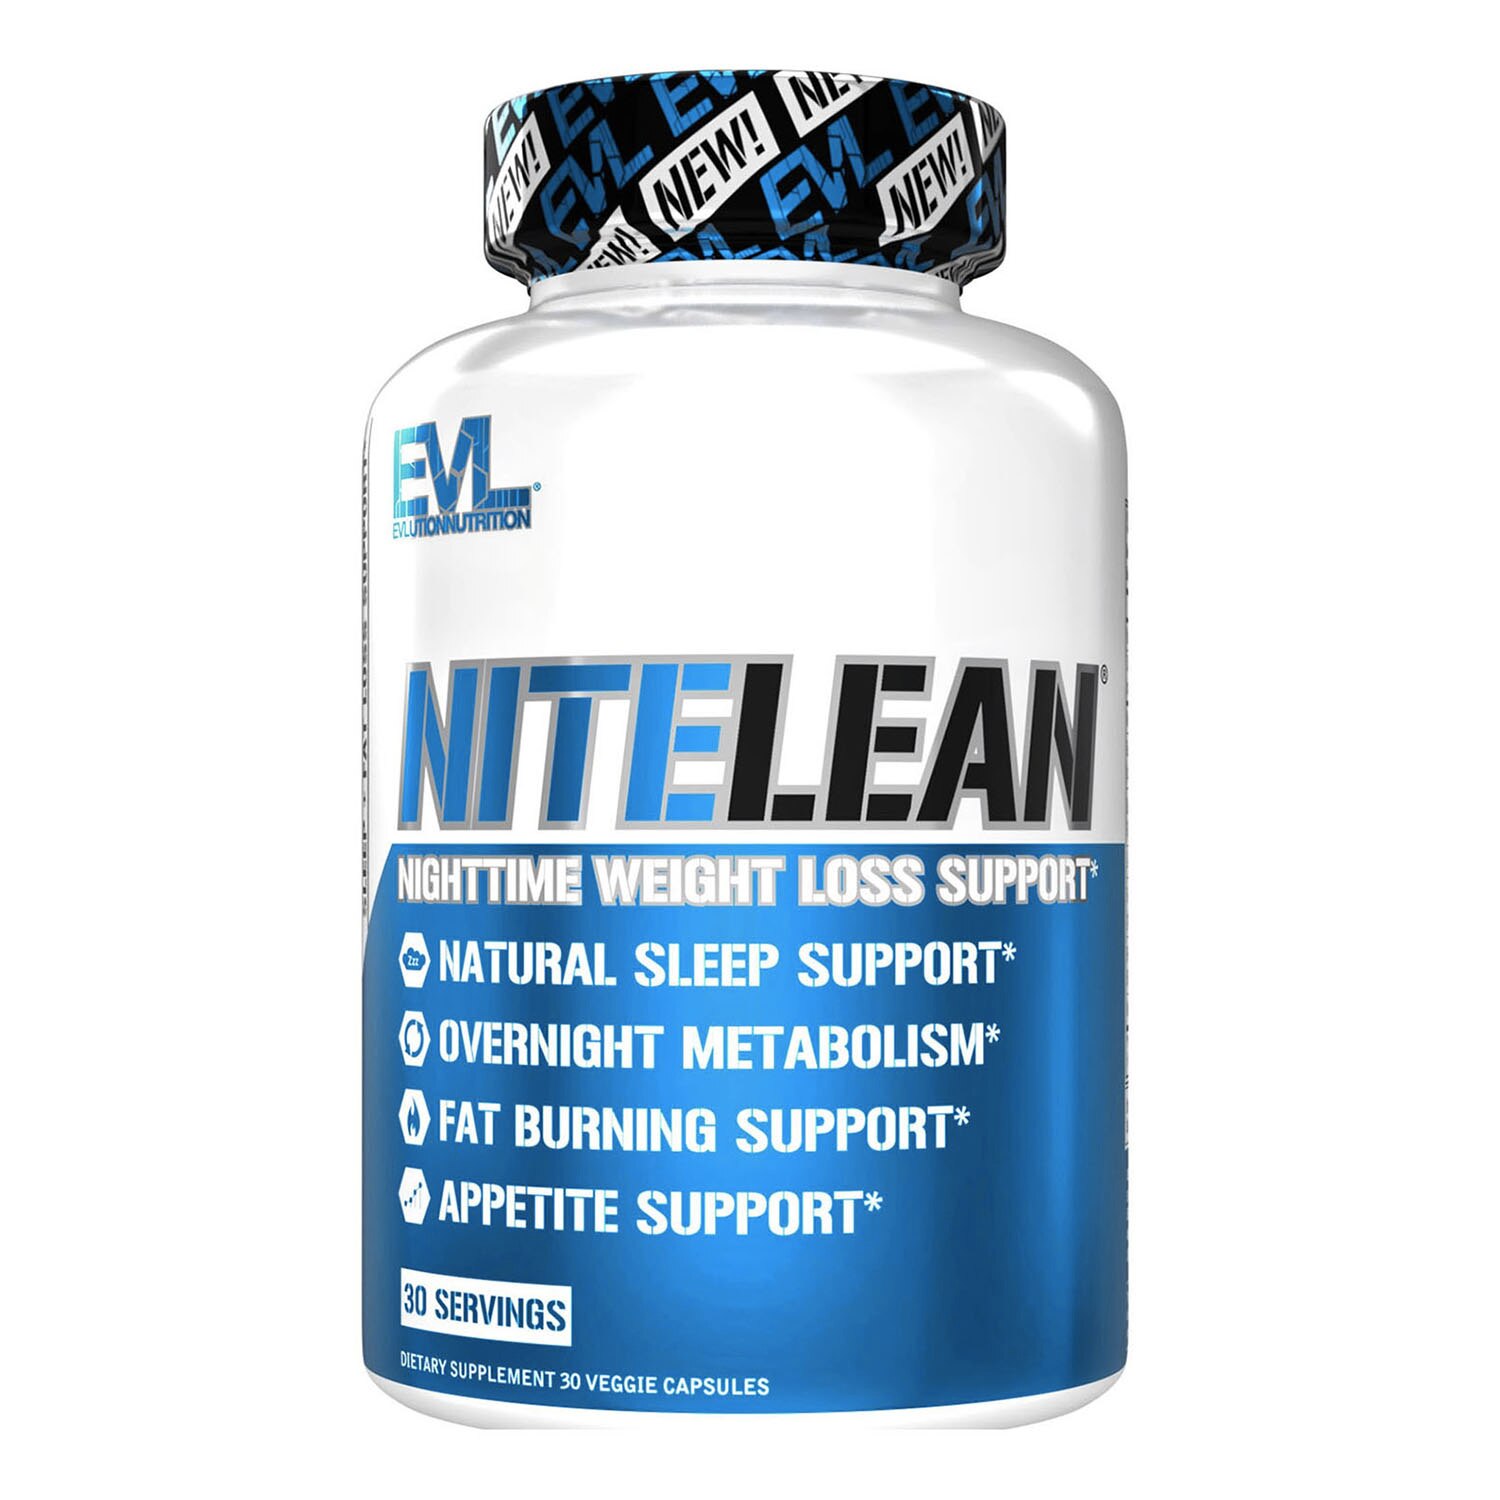 Evlution Nutrition NiteLean Nighttime Weight Loss Support Capsules, 30 Servings